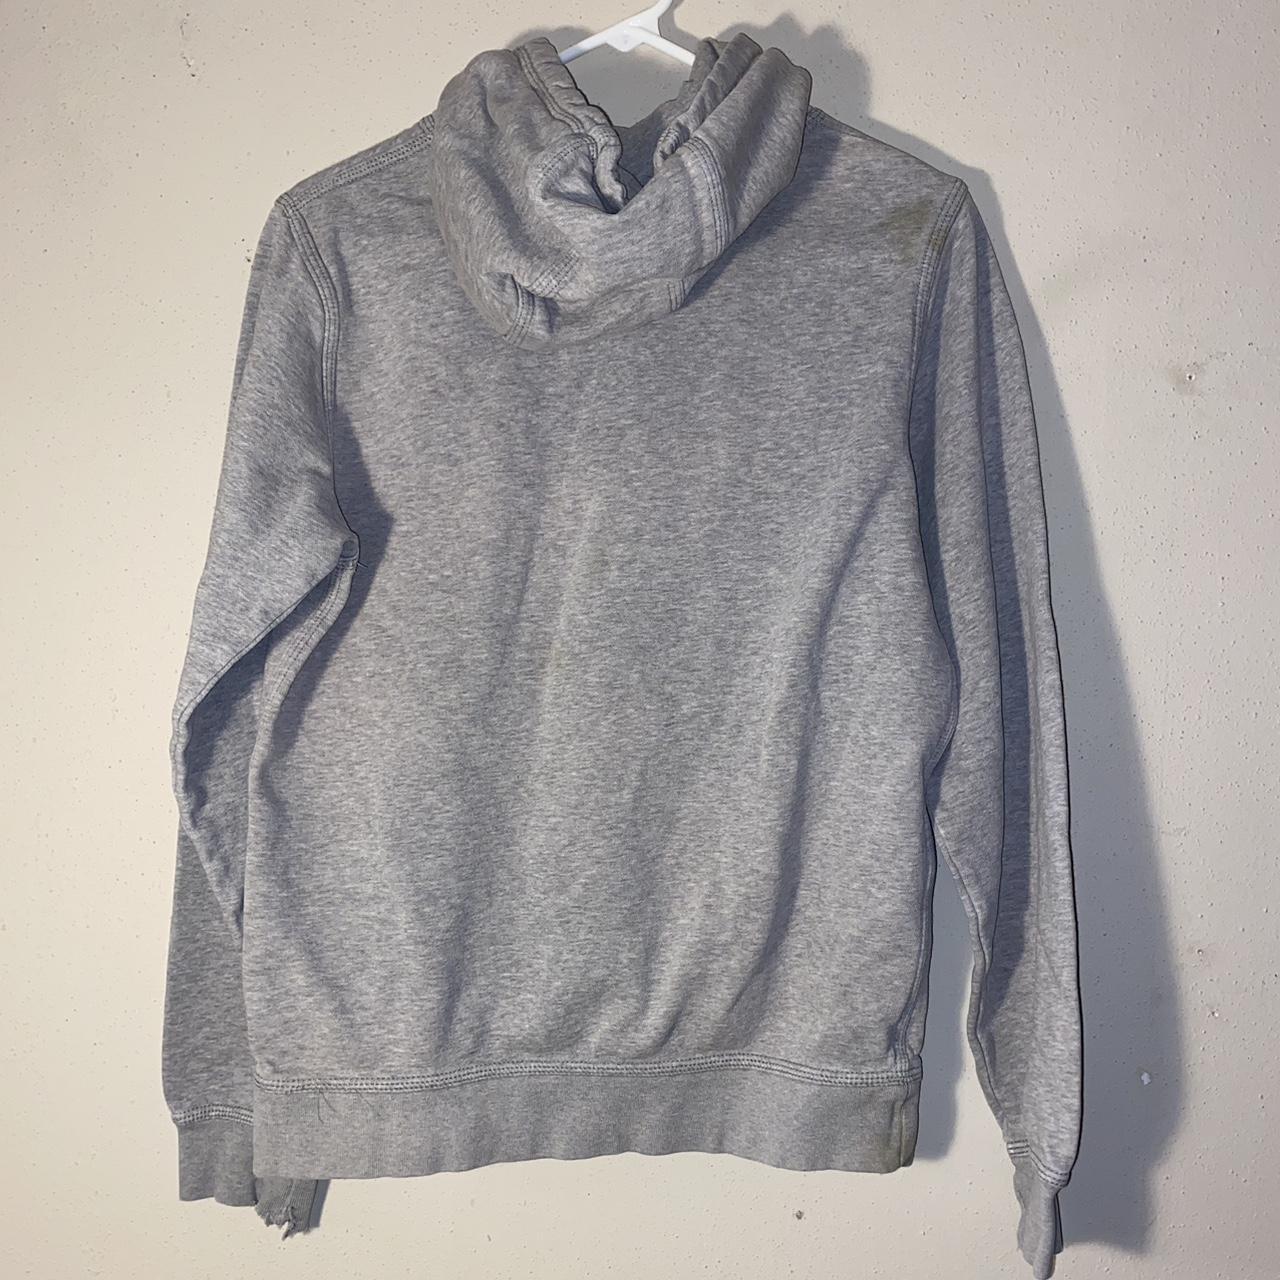 Nike Swoosh Mens Pullover Hoodie Solid Gray Small S... - Depop